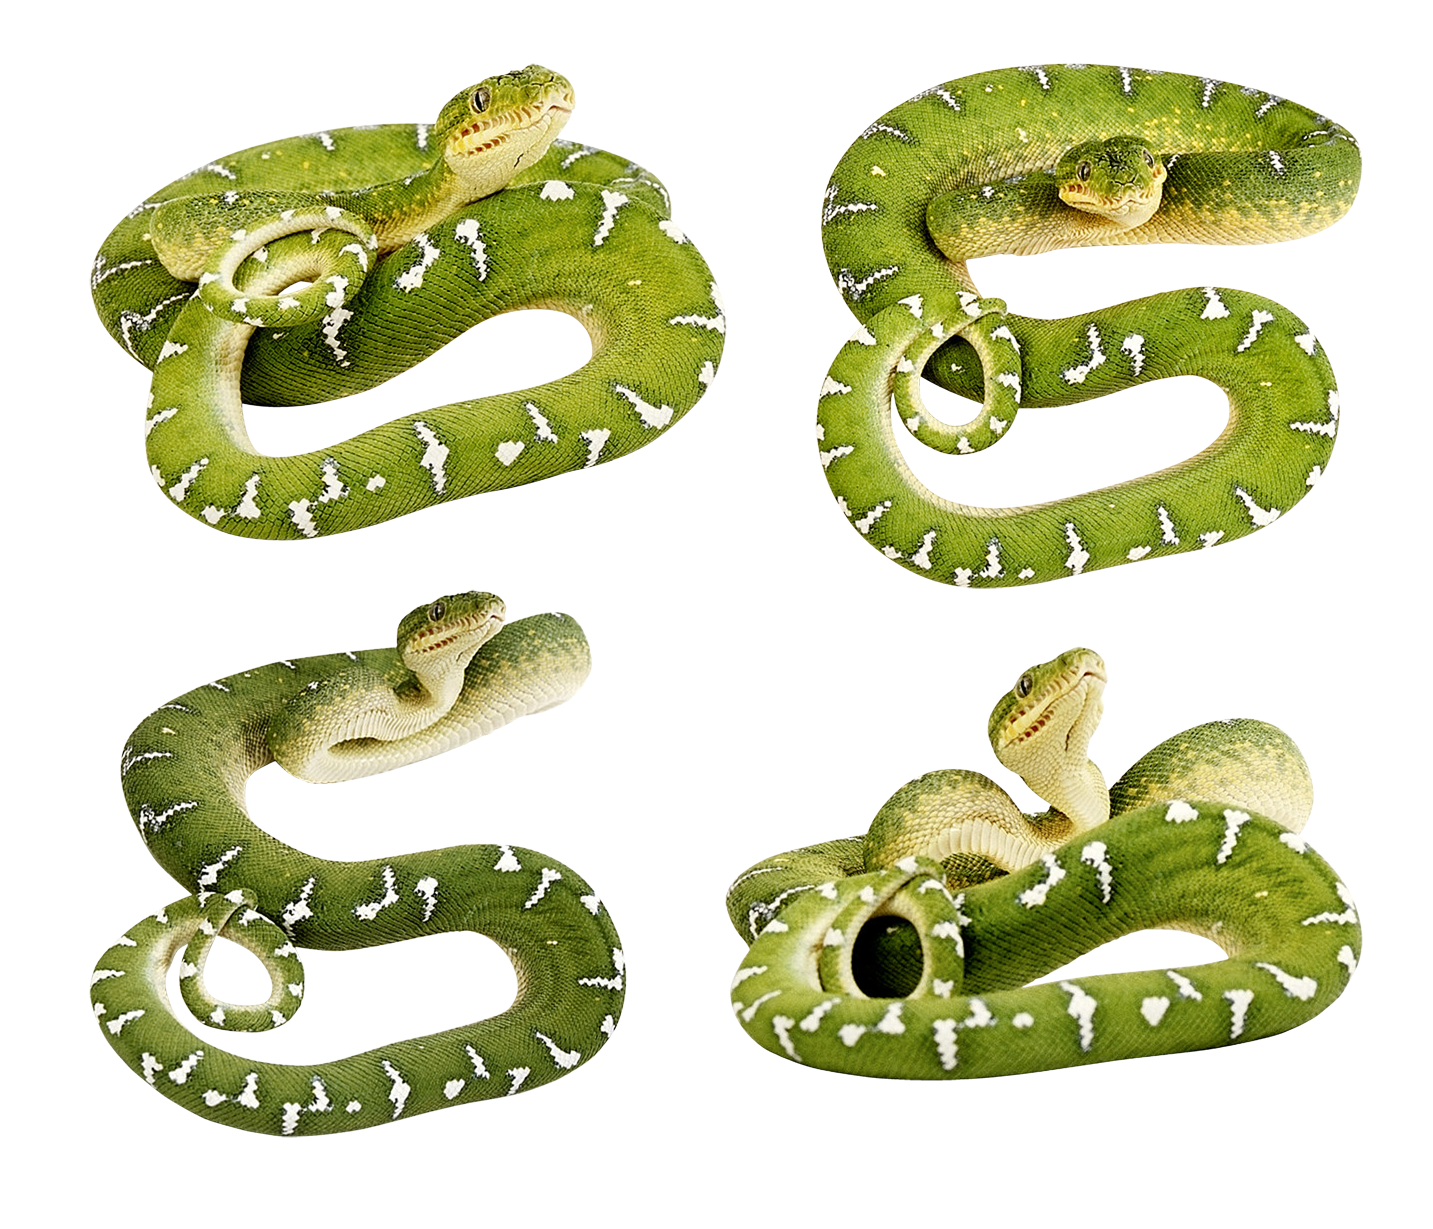 Green snakes PNG image